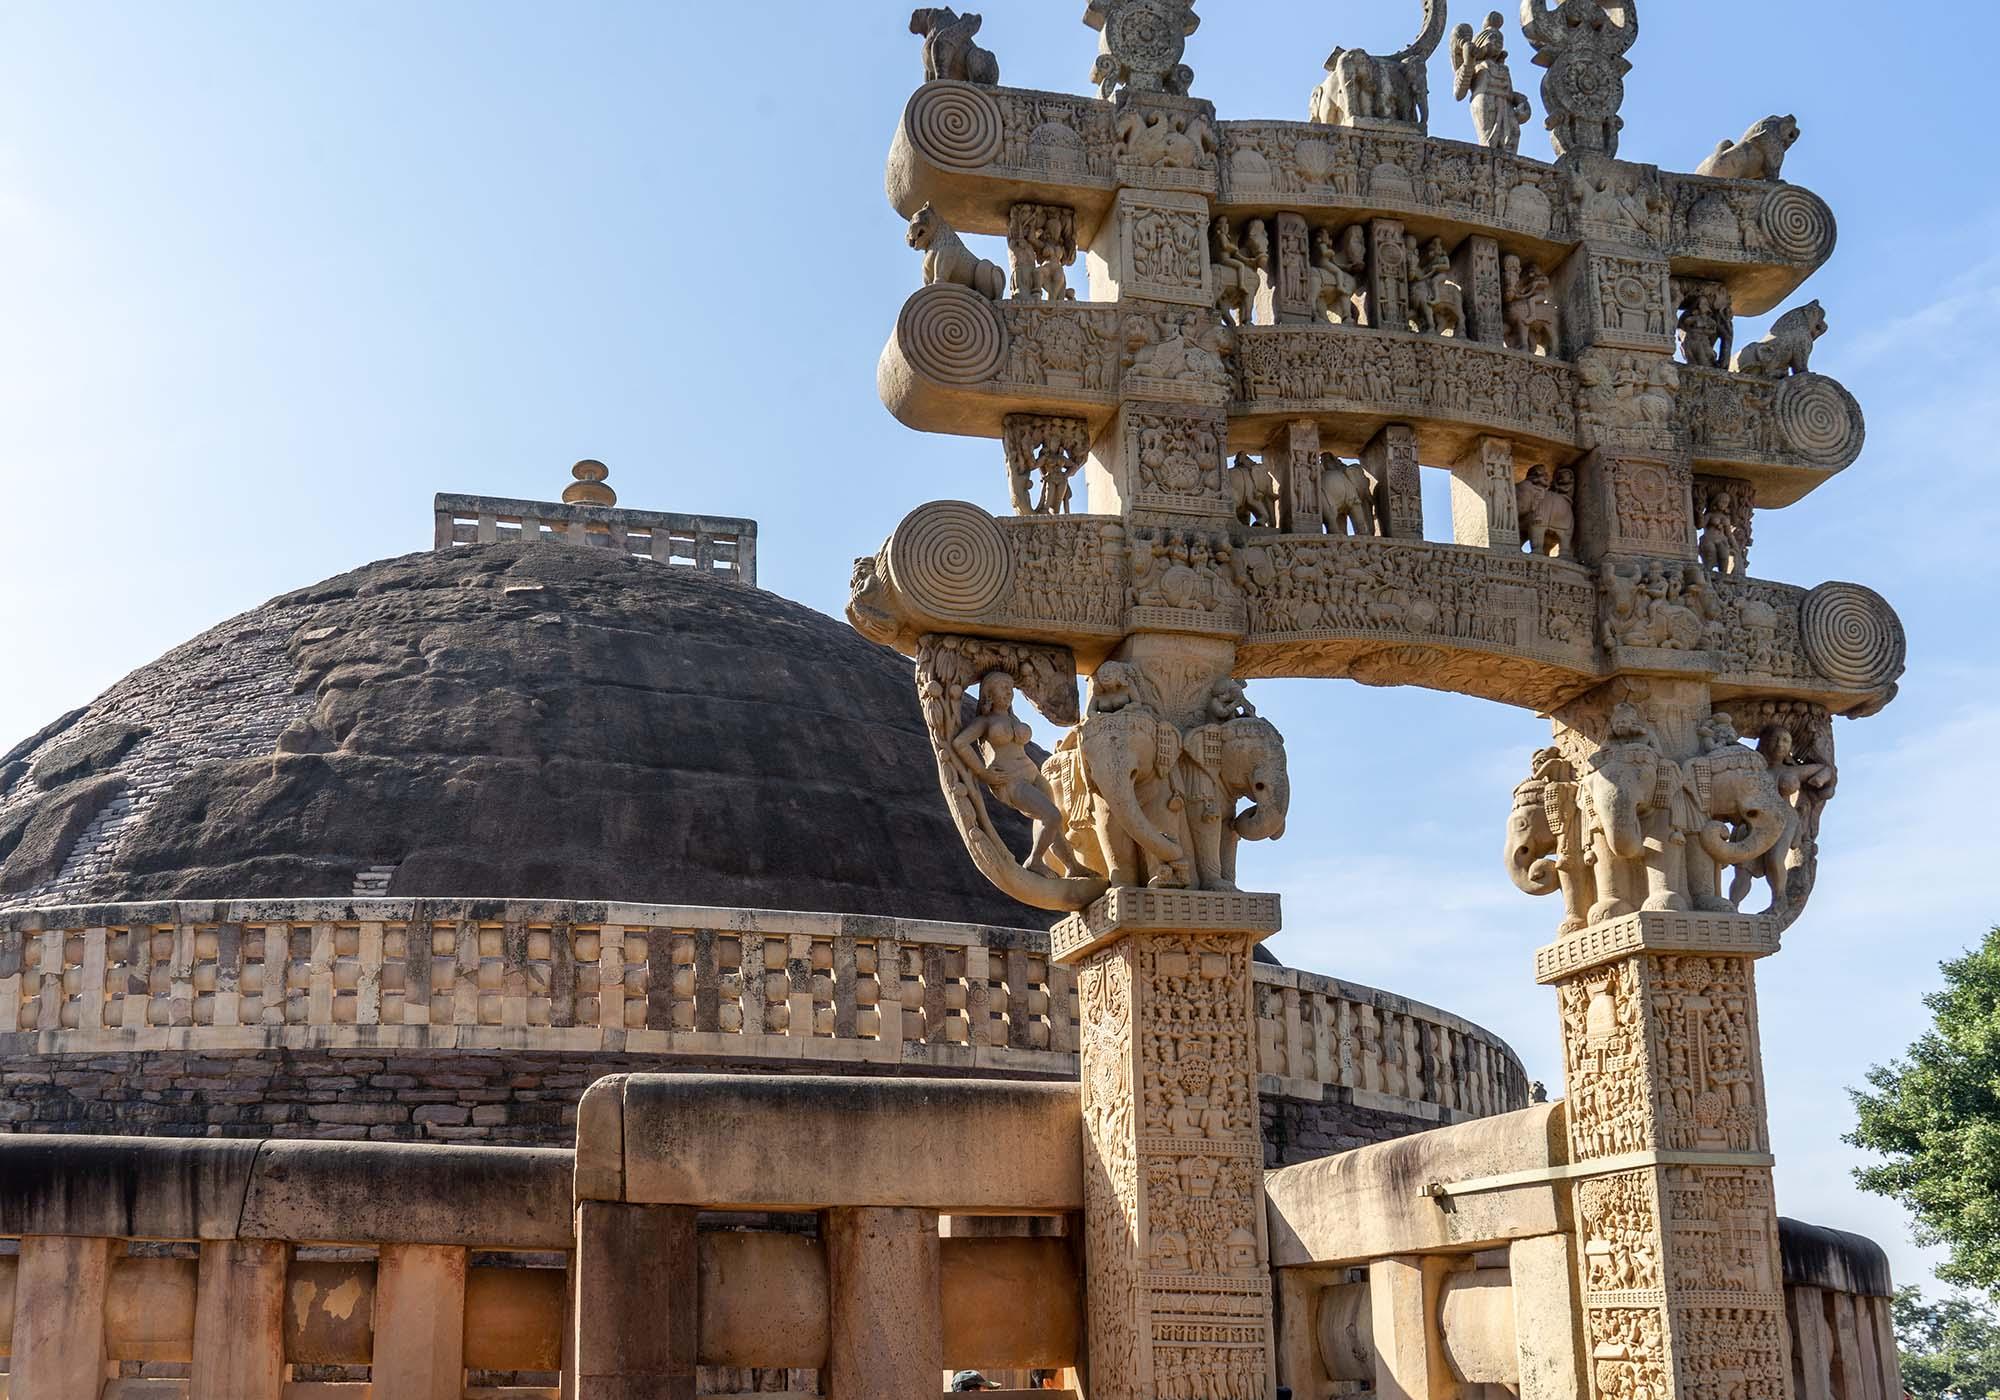 One of the four gateways that sit at the cardinal points around the Great Stupa of Sanchi and have the intricate carvings on the architraves. – © Michael Turtle